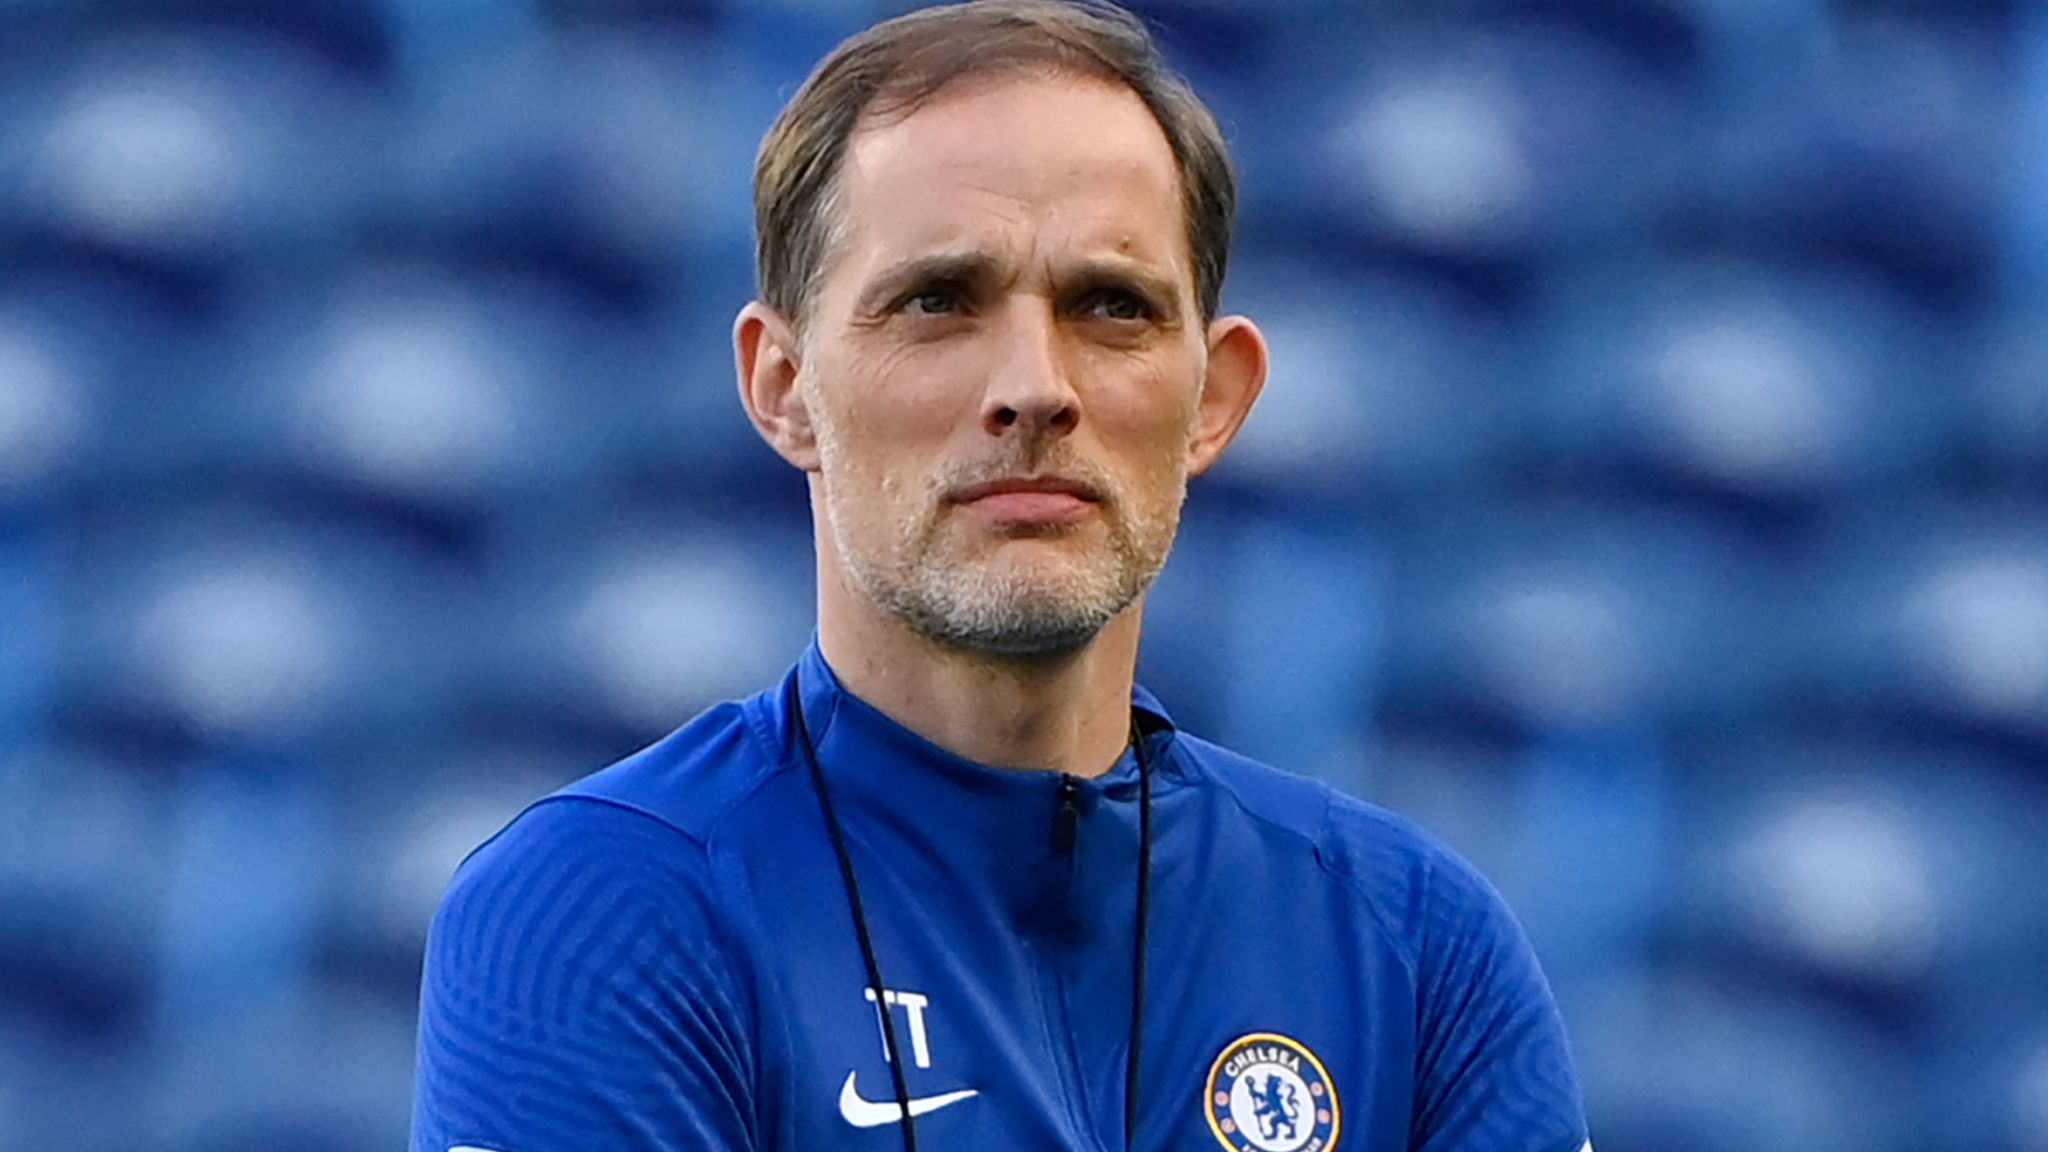 Thomas Tuchel said he "couldn't imagine" Chelsea without Roman Abramovich, After the club was put up for sale.